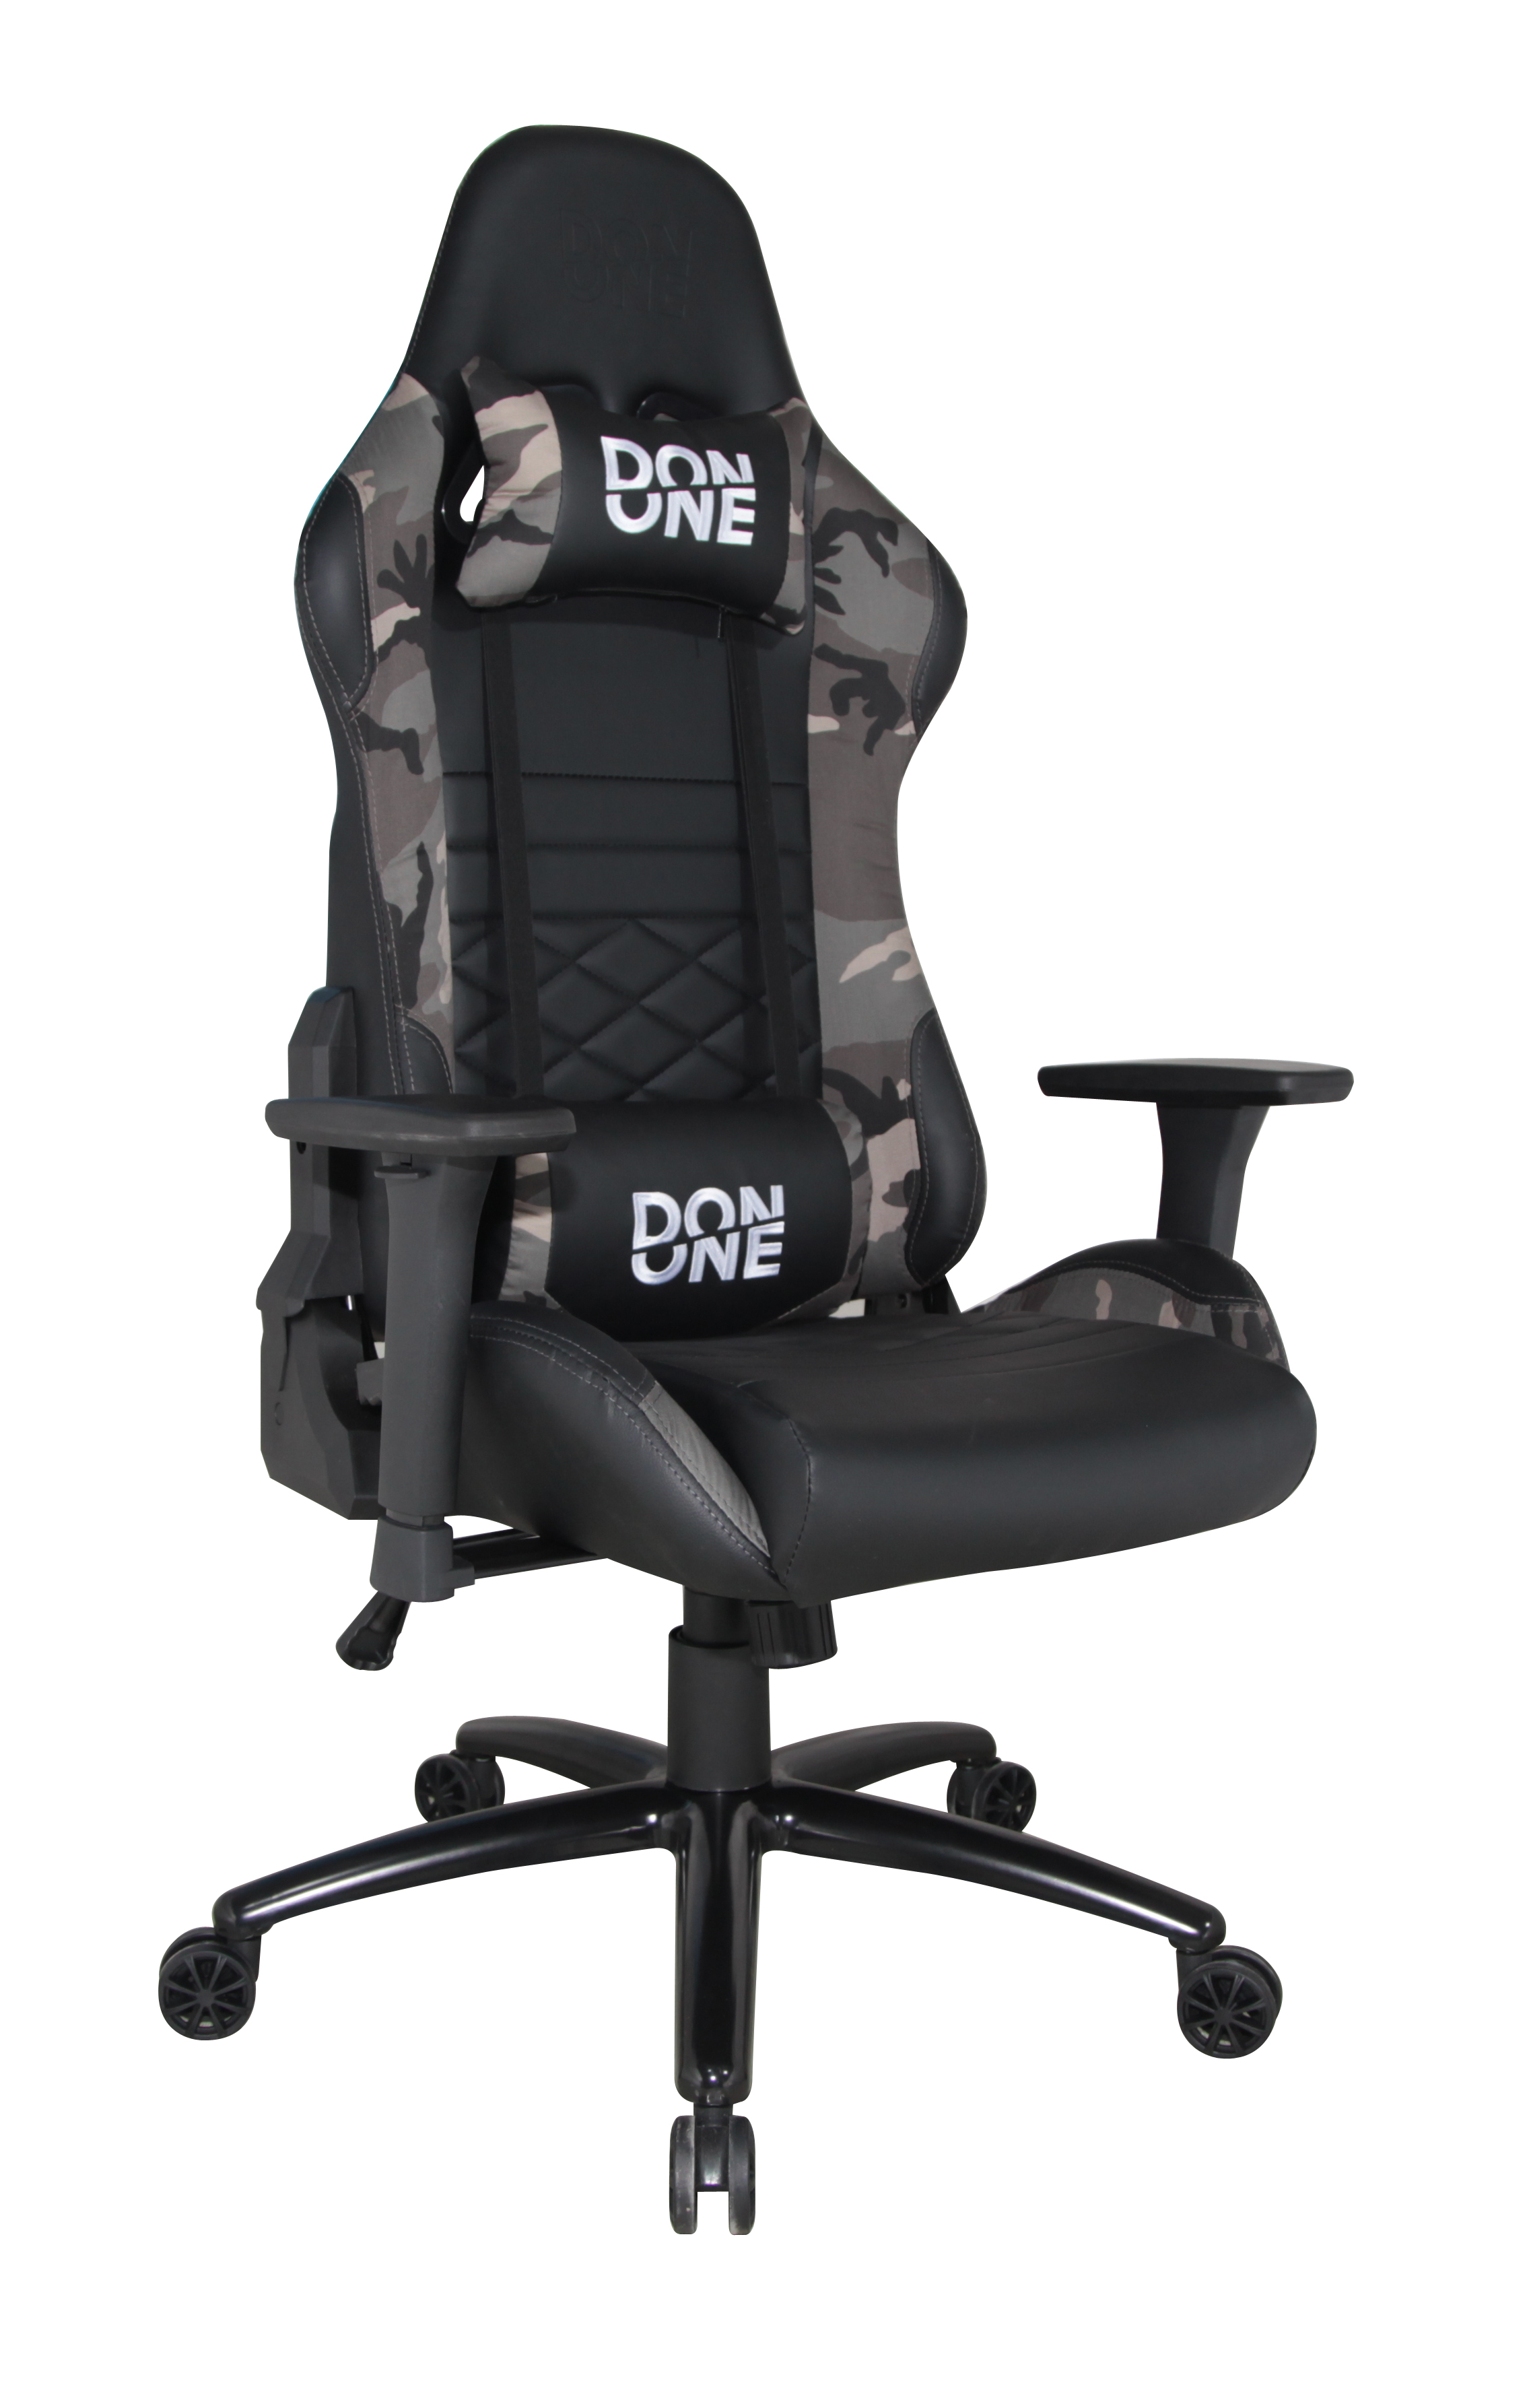 DON ONE -GC300 GAMING CHAIR Black/Camouflage